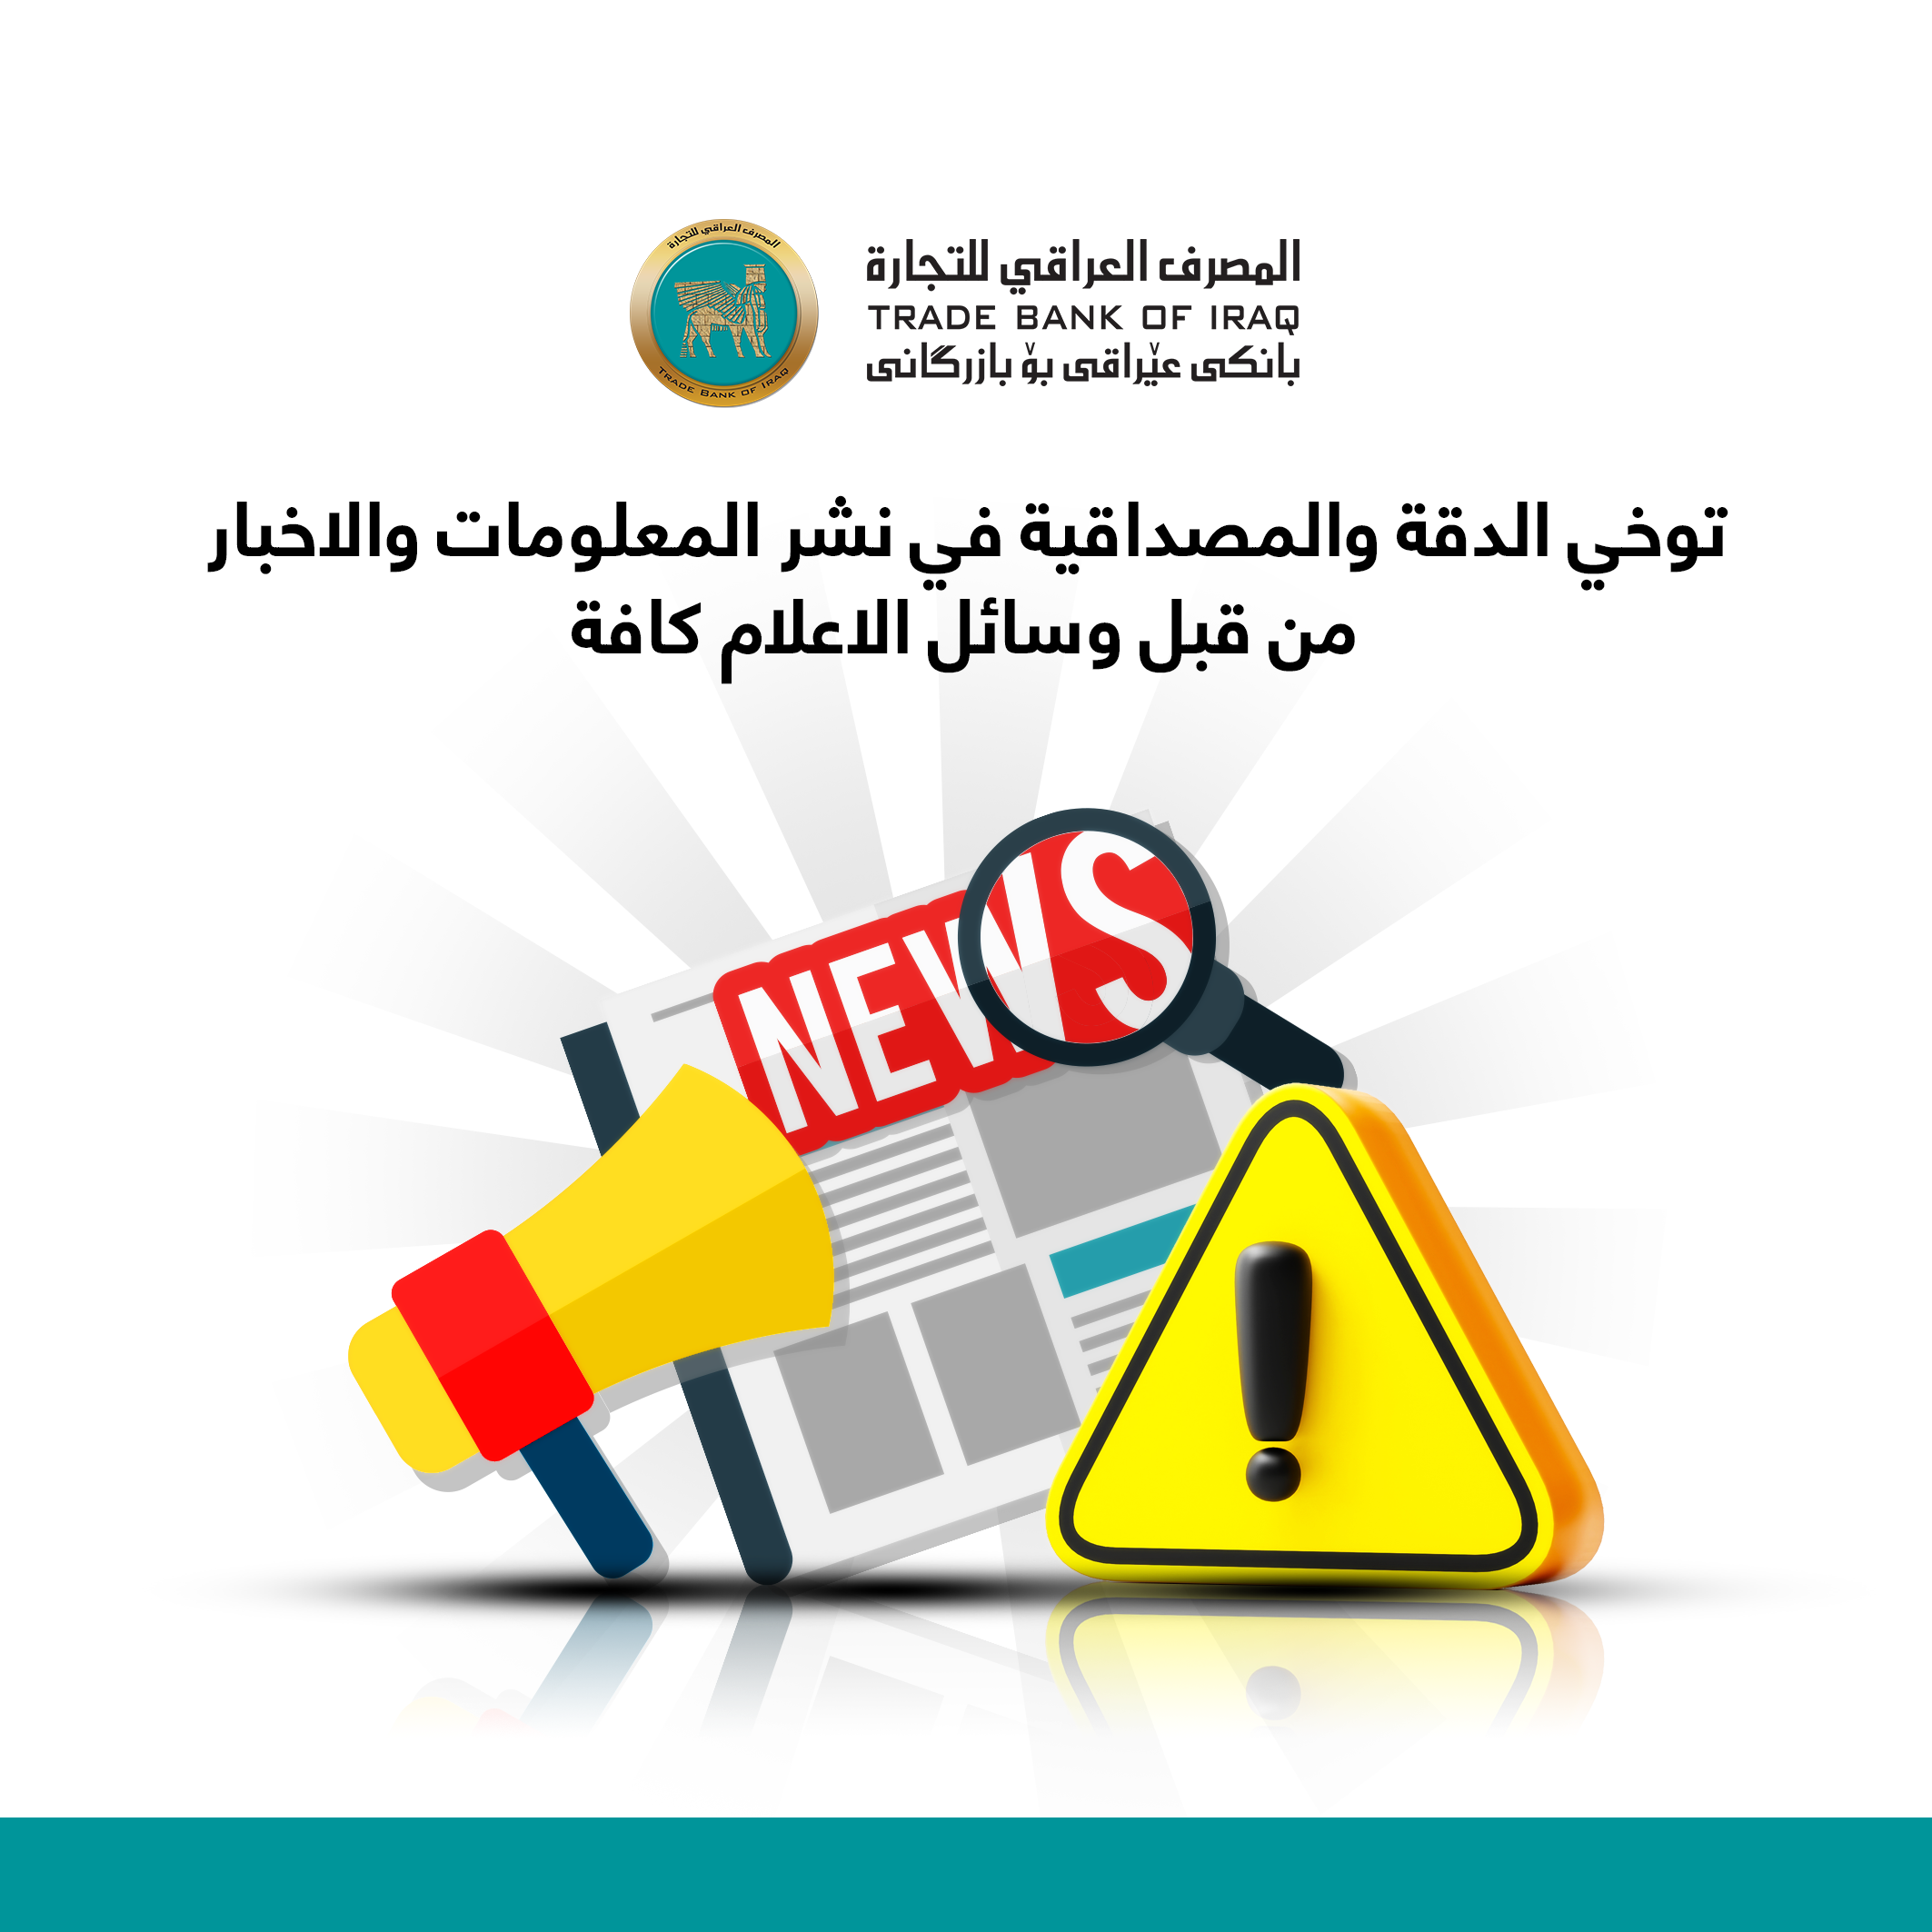 Trade Bank of Iraq (TBI) indicates to all media that the recent-published statements and information concerning the Bank are false, wrong, or quoted by an unauthorized entity